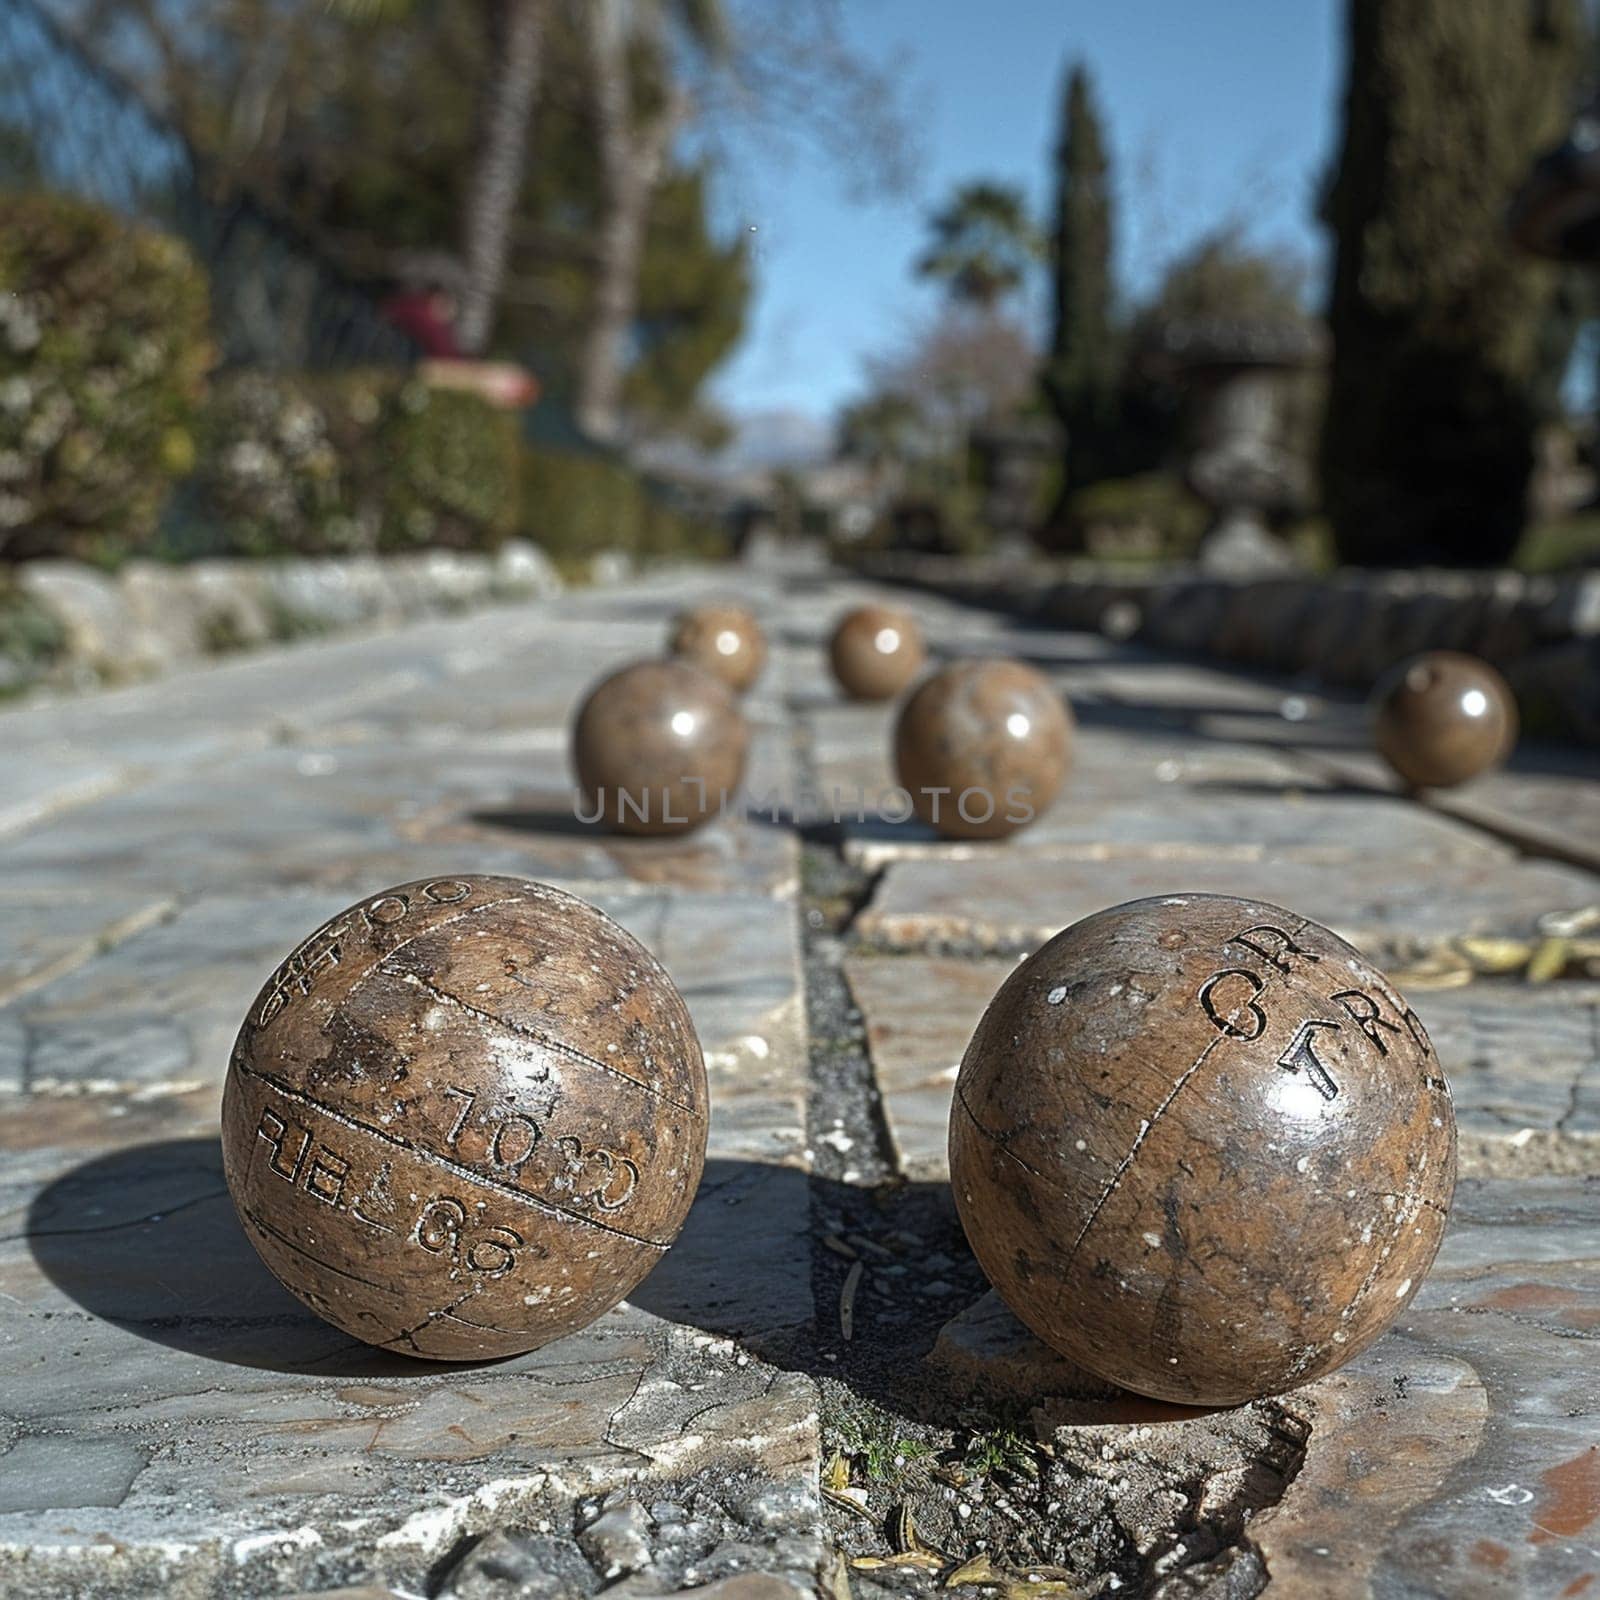 Petanque balls close to the cochonnet, showcasing strategy and leisurely competition.